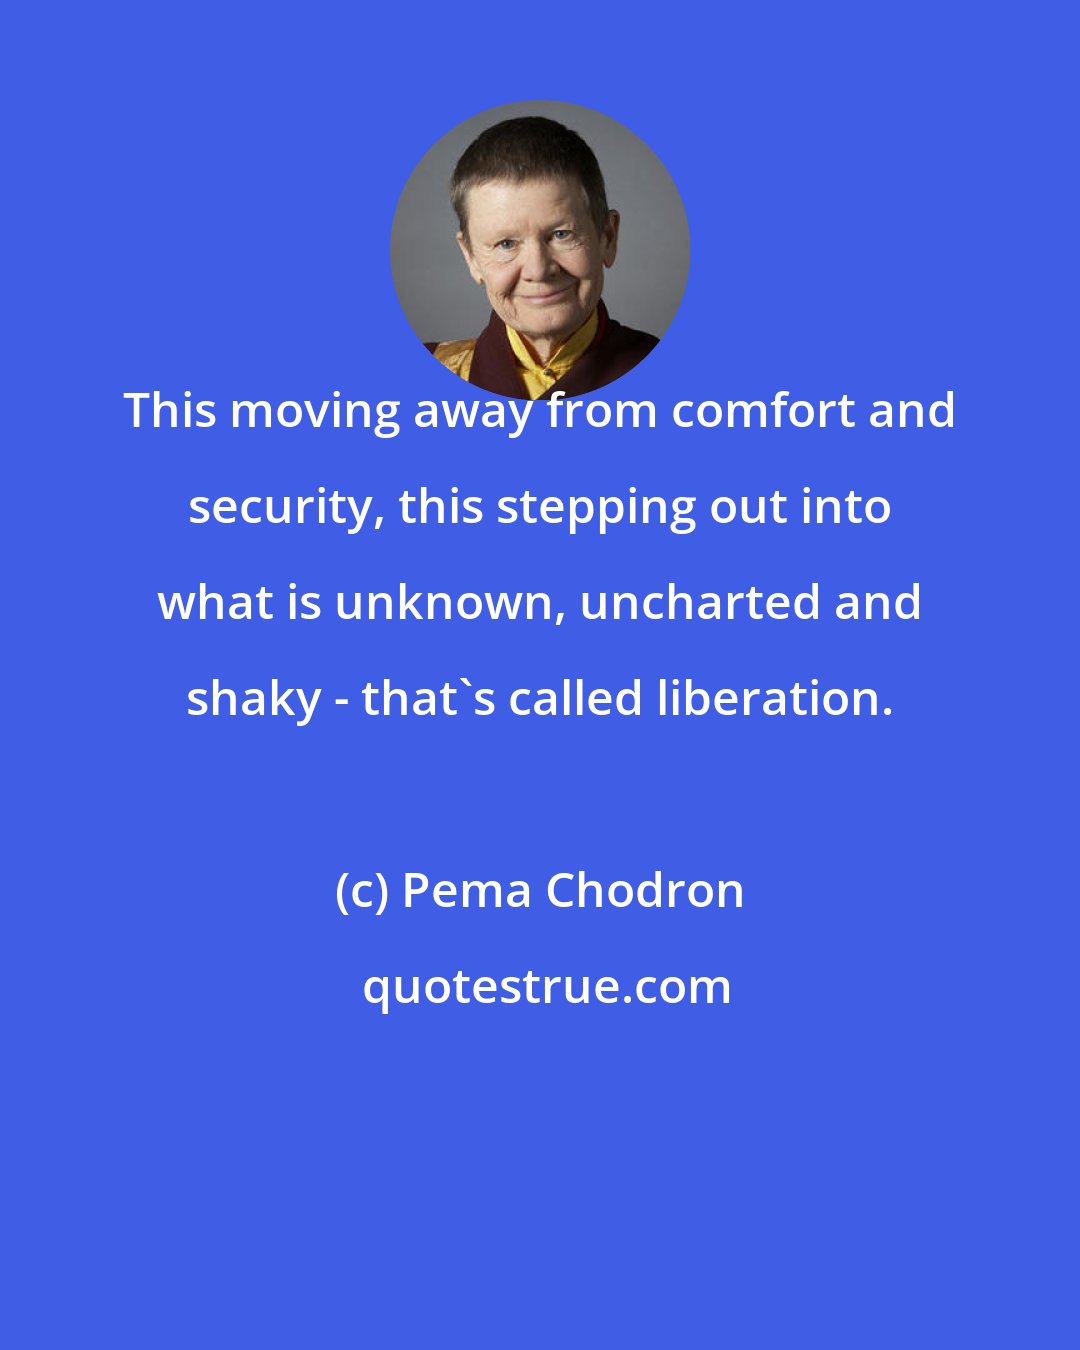 Pema Chodron: This moving away from comfort and security, this stepping out into what is unknown, uncharted and shaky - that's called liberation.